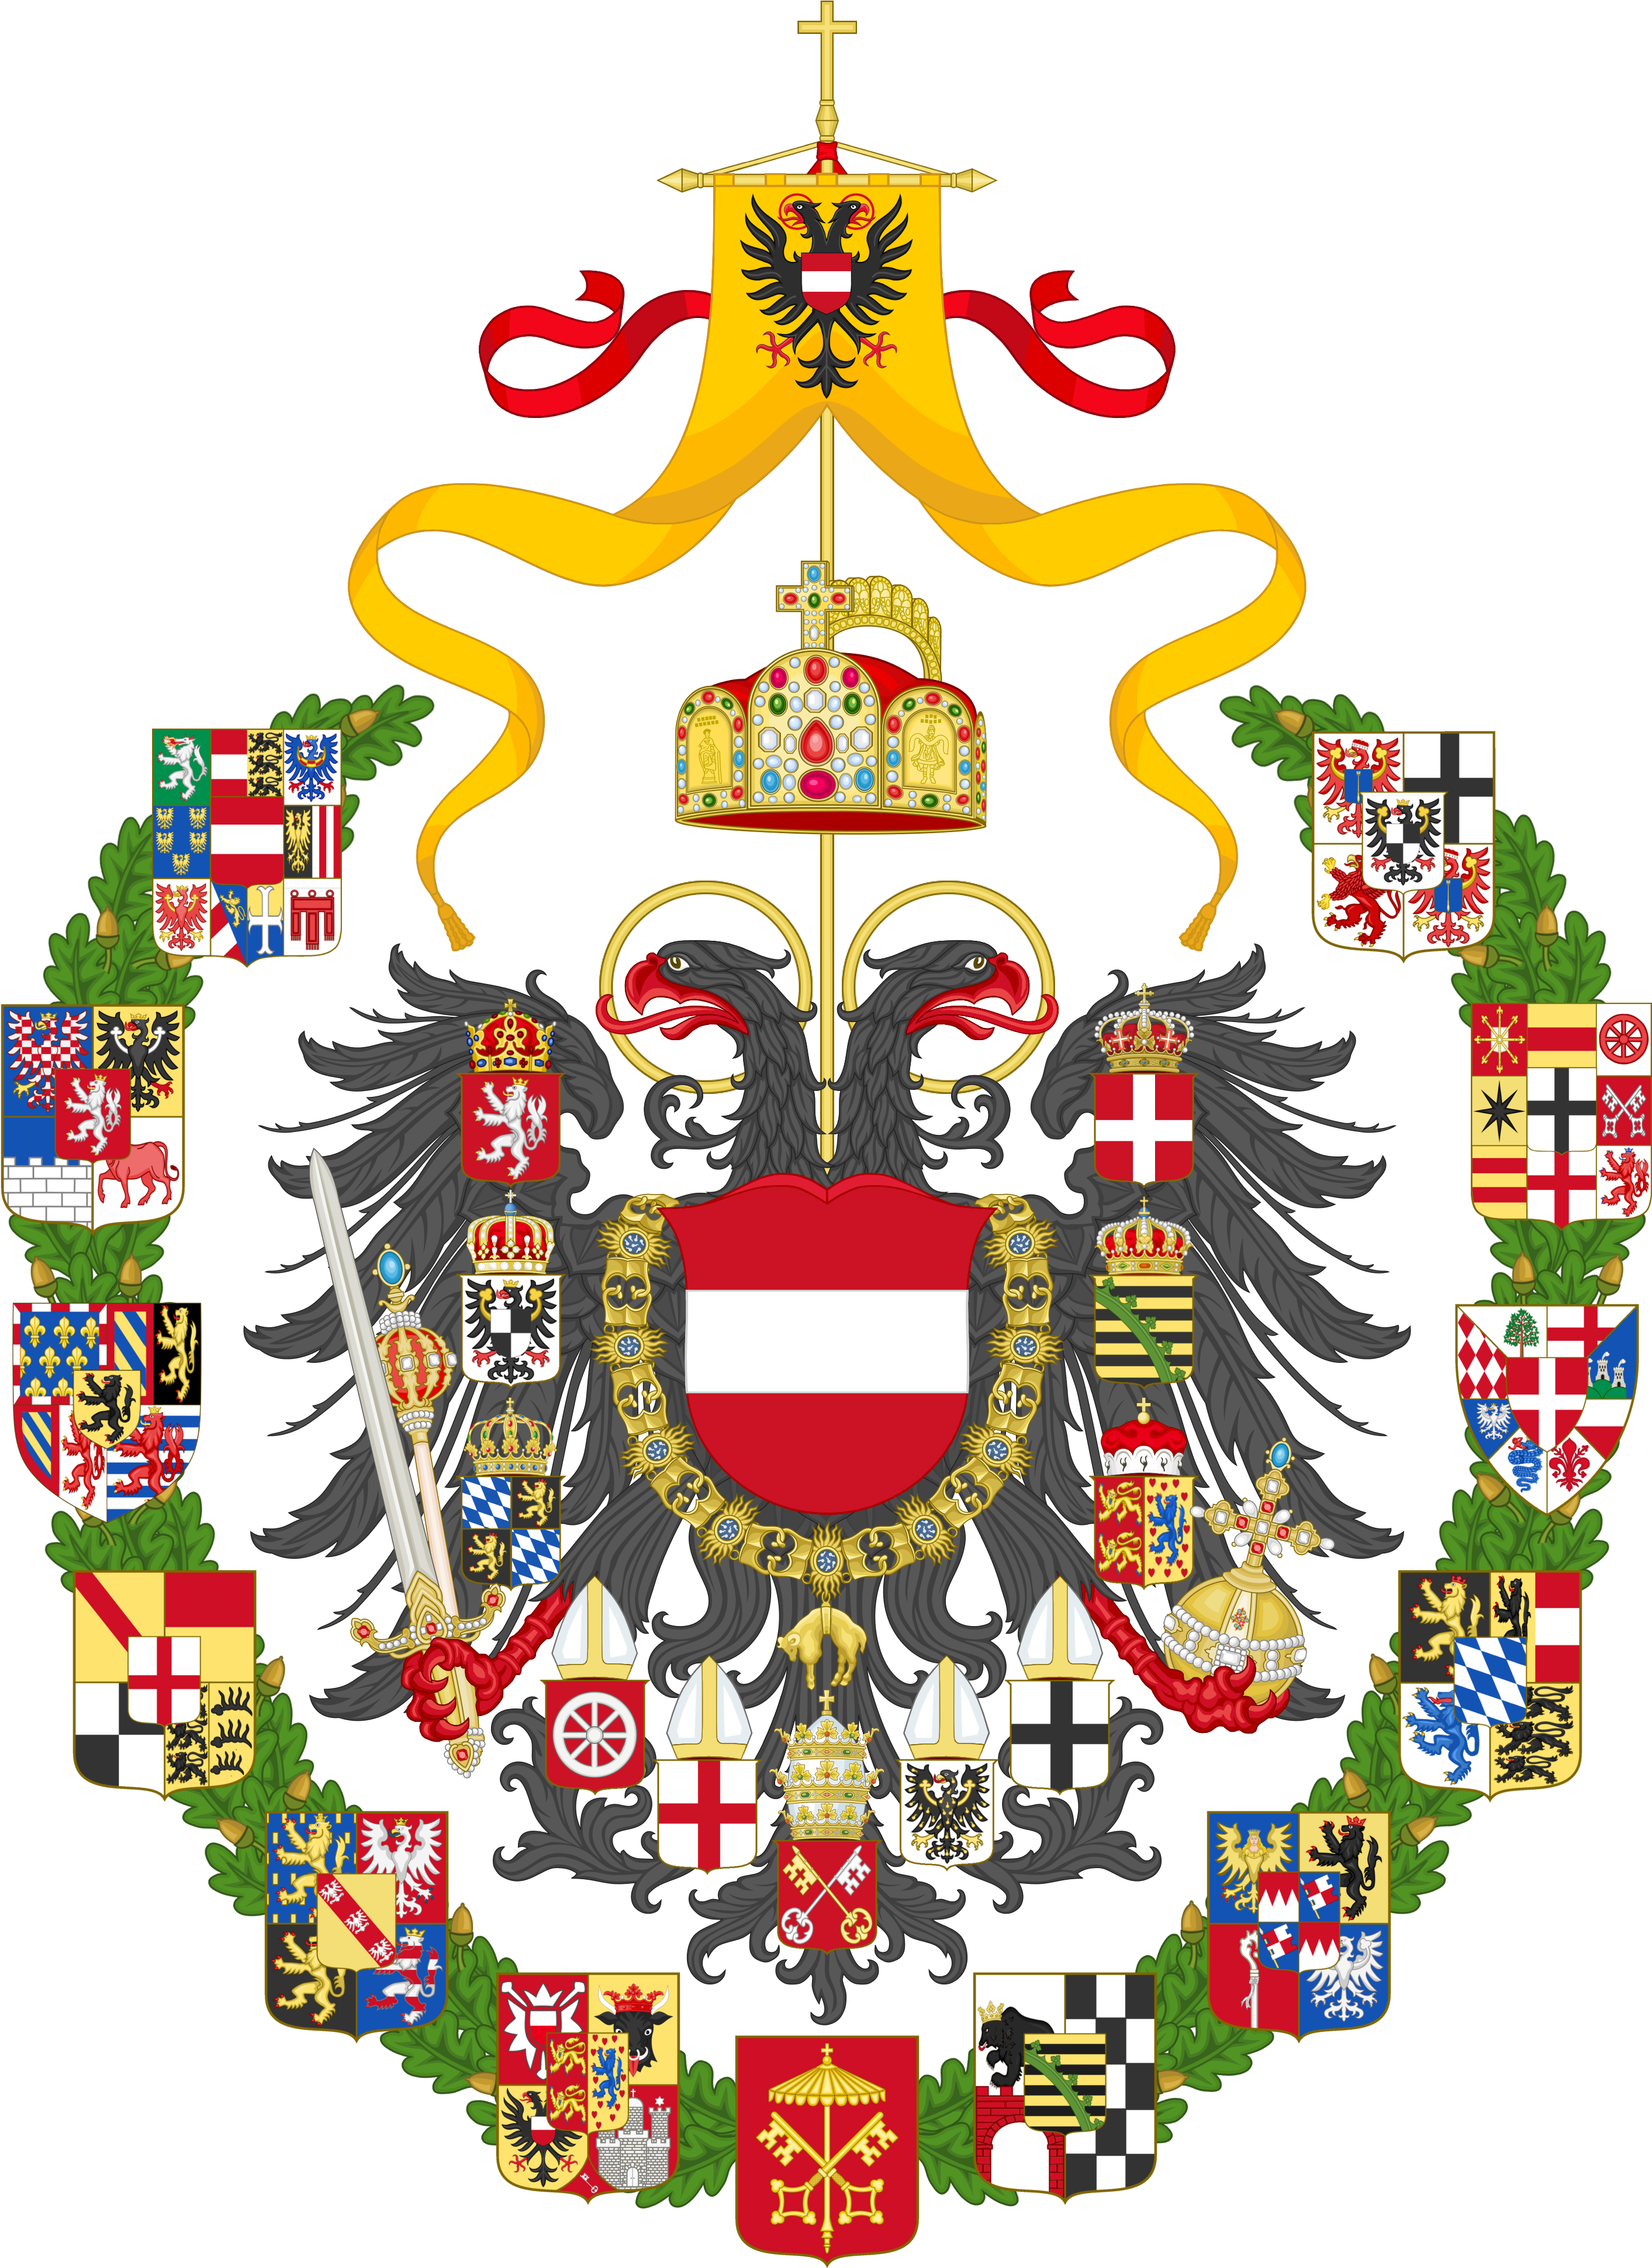 Centralized Holy Roman Empire By Tiltschmaster - Habsburgs In The 21st Century [book] (2875x3900)